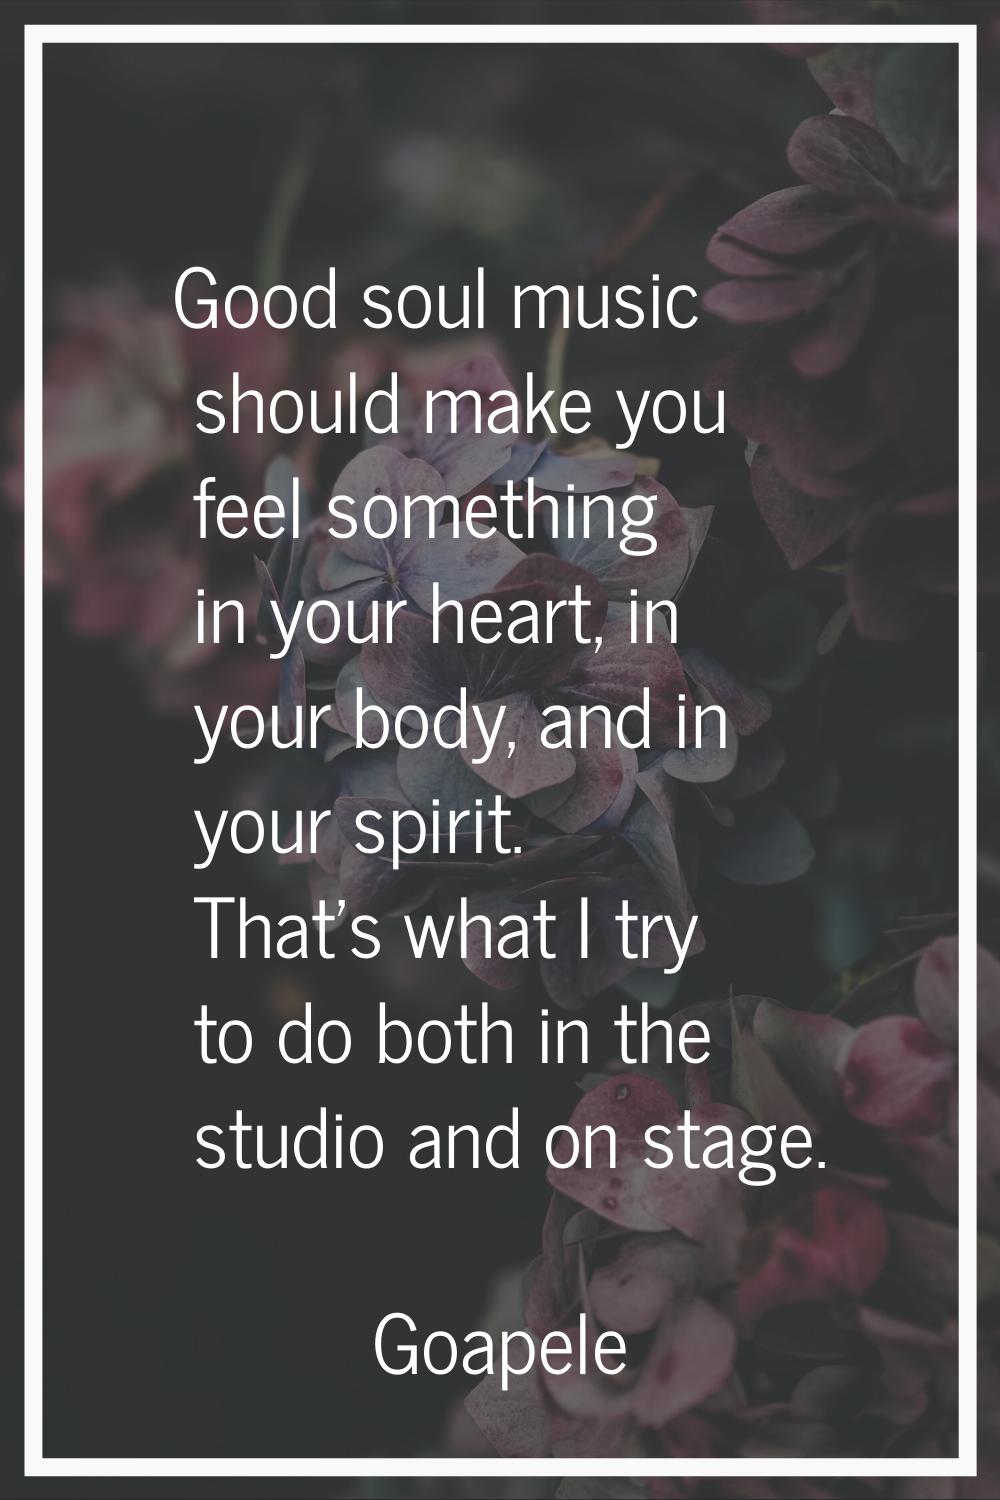 Good soul music should make you feel something in your heart, in your body, and in your spirit. Tha